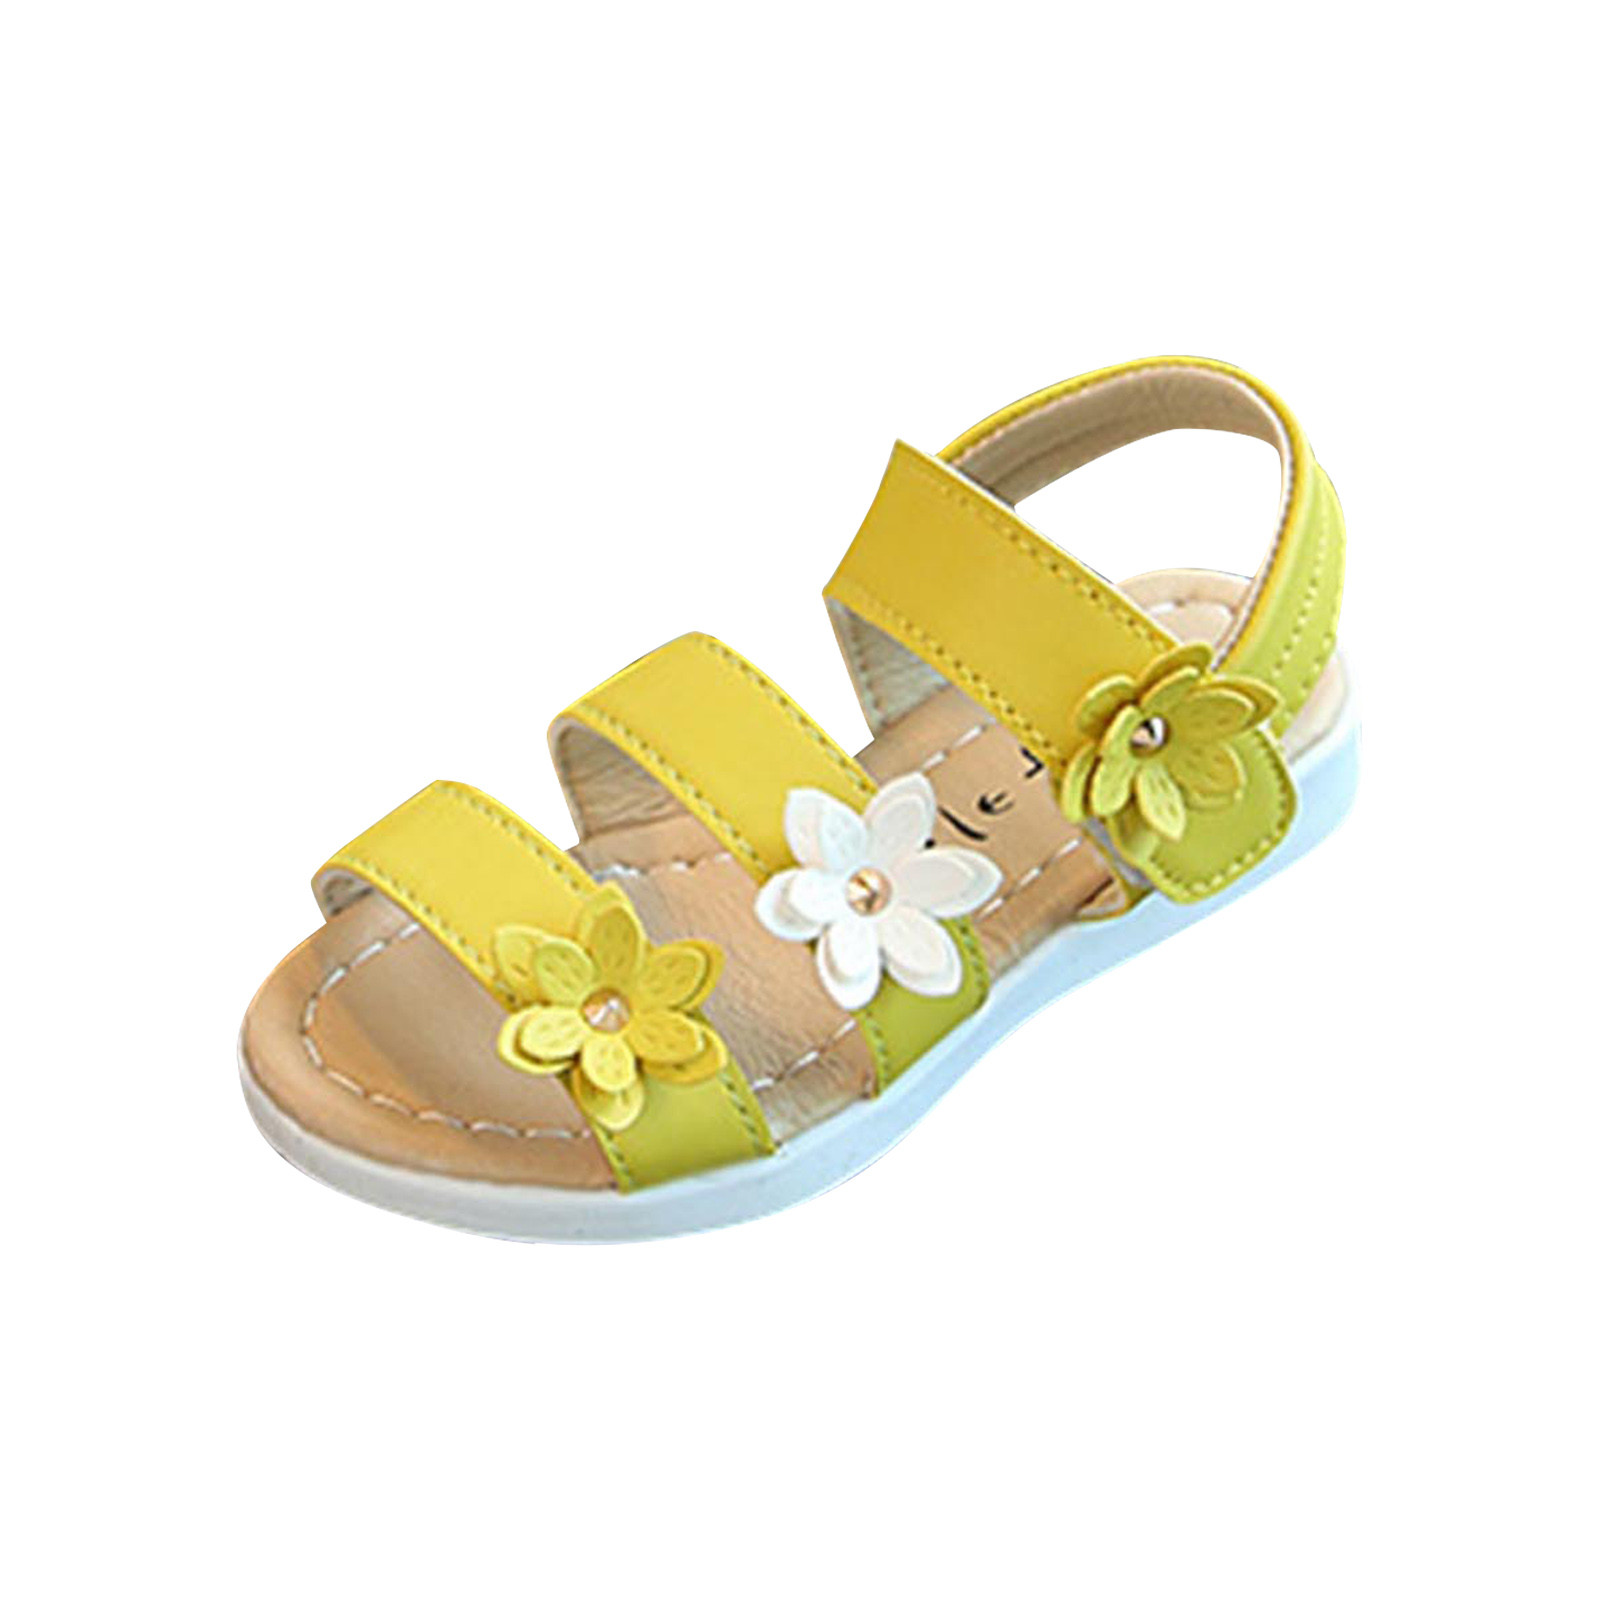 LoyisViDion Toddler Shoes Clearance Children Girls Shoes Sandals Princess Open-Toed Soft Bottom Flowers Roman Beach Shoes Yellow 9-9.5Years - image 2 of 6